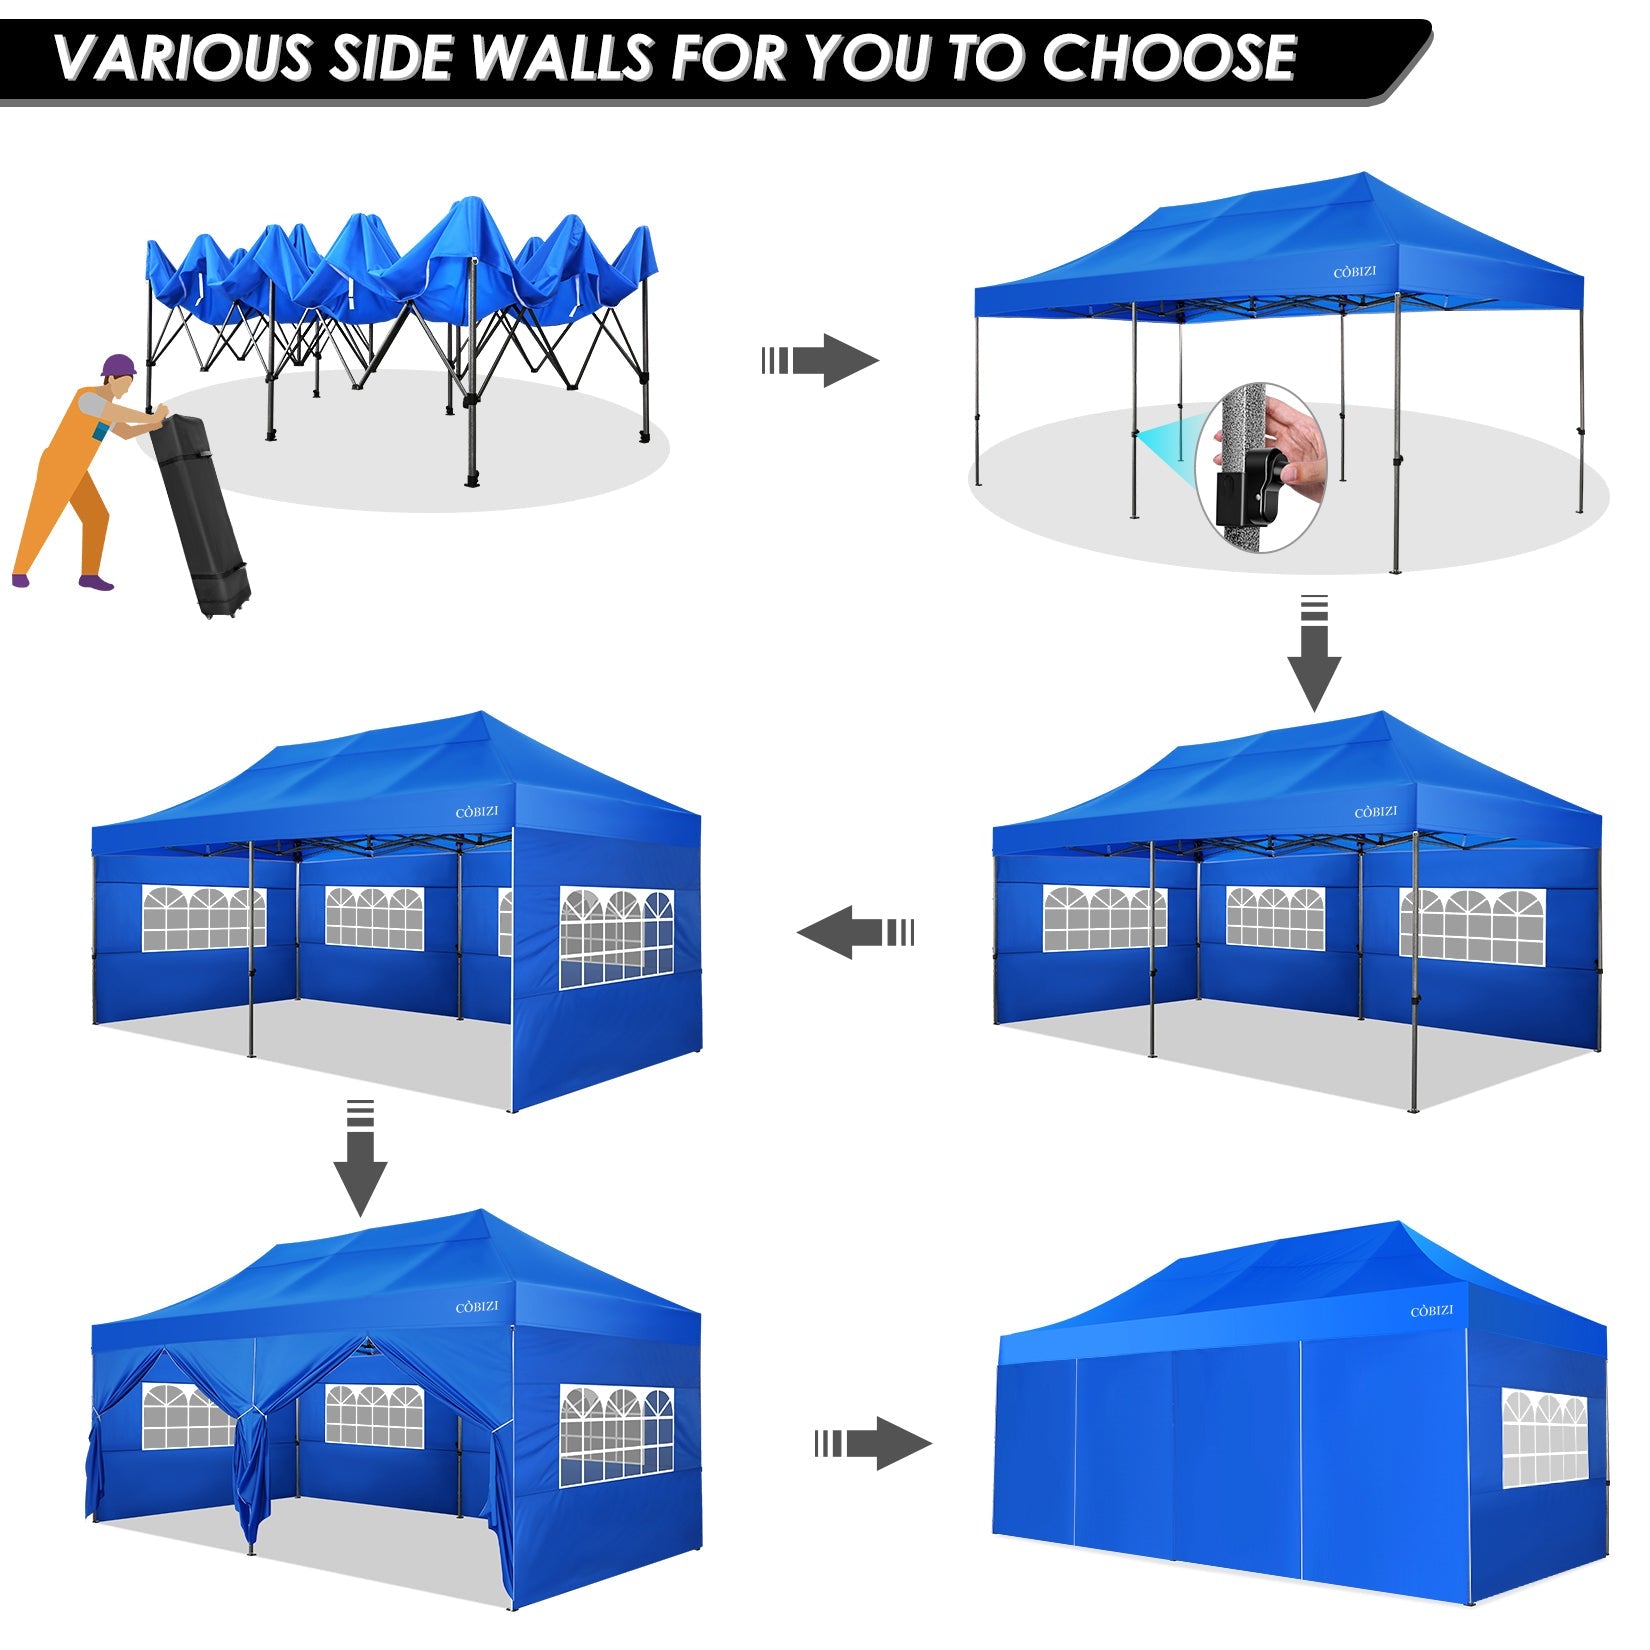 10'x20' Pop Up Canopy Waterproof Folding Tent Outdoor Easy Set-up Instant Tent Heavy Duty Commercial Wedding Party Shelter with 6 Removable Sidewalls, 6 Sandbags, Roller Bag, Blue